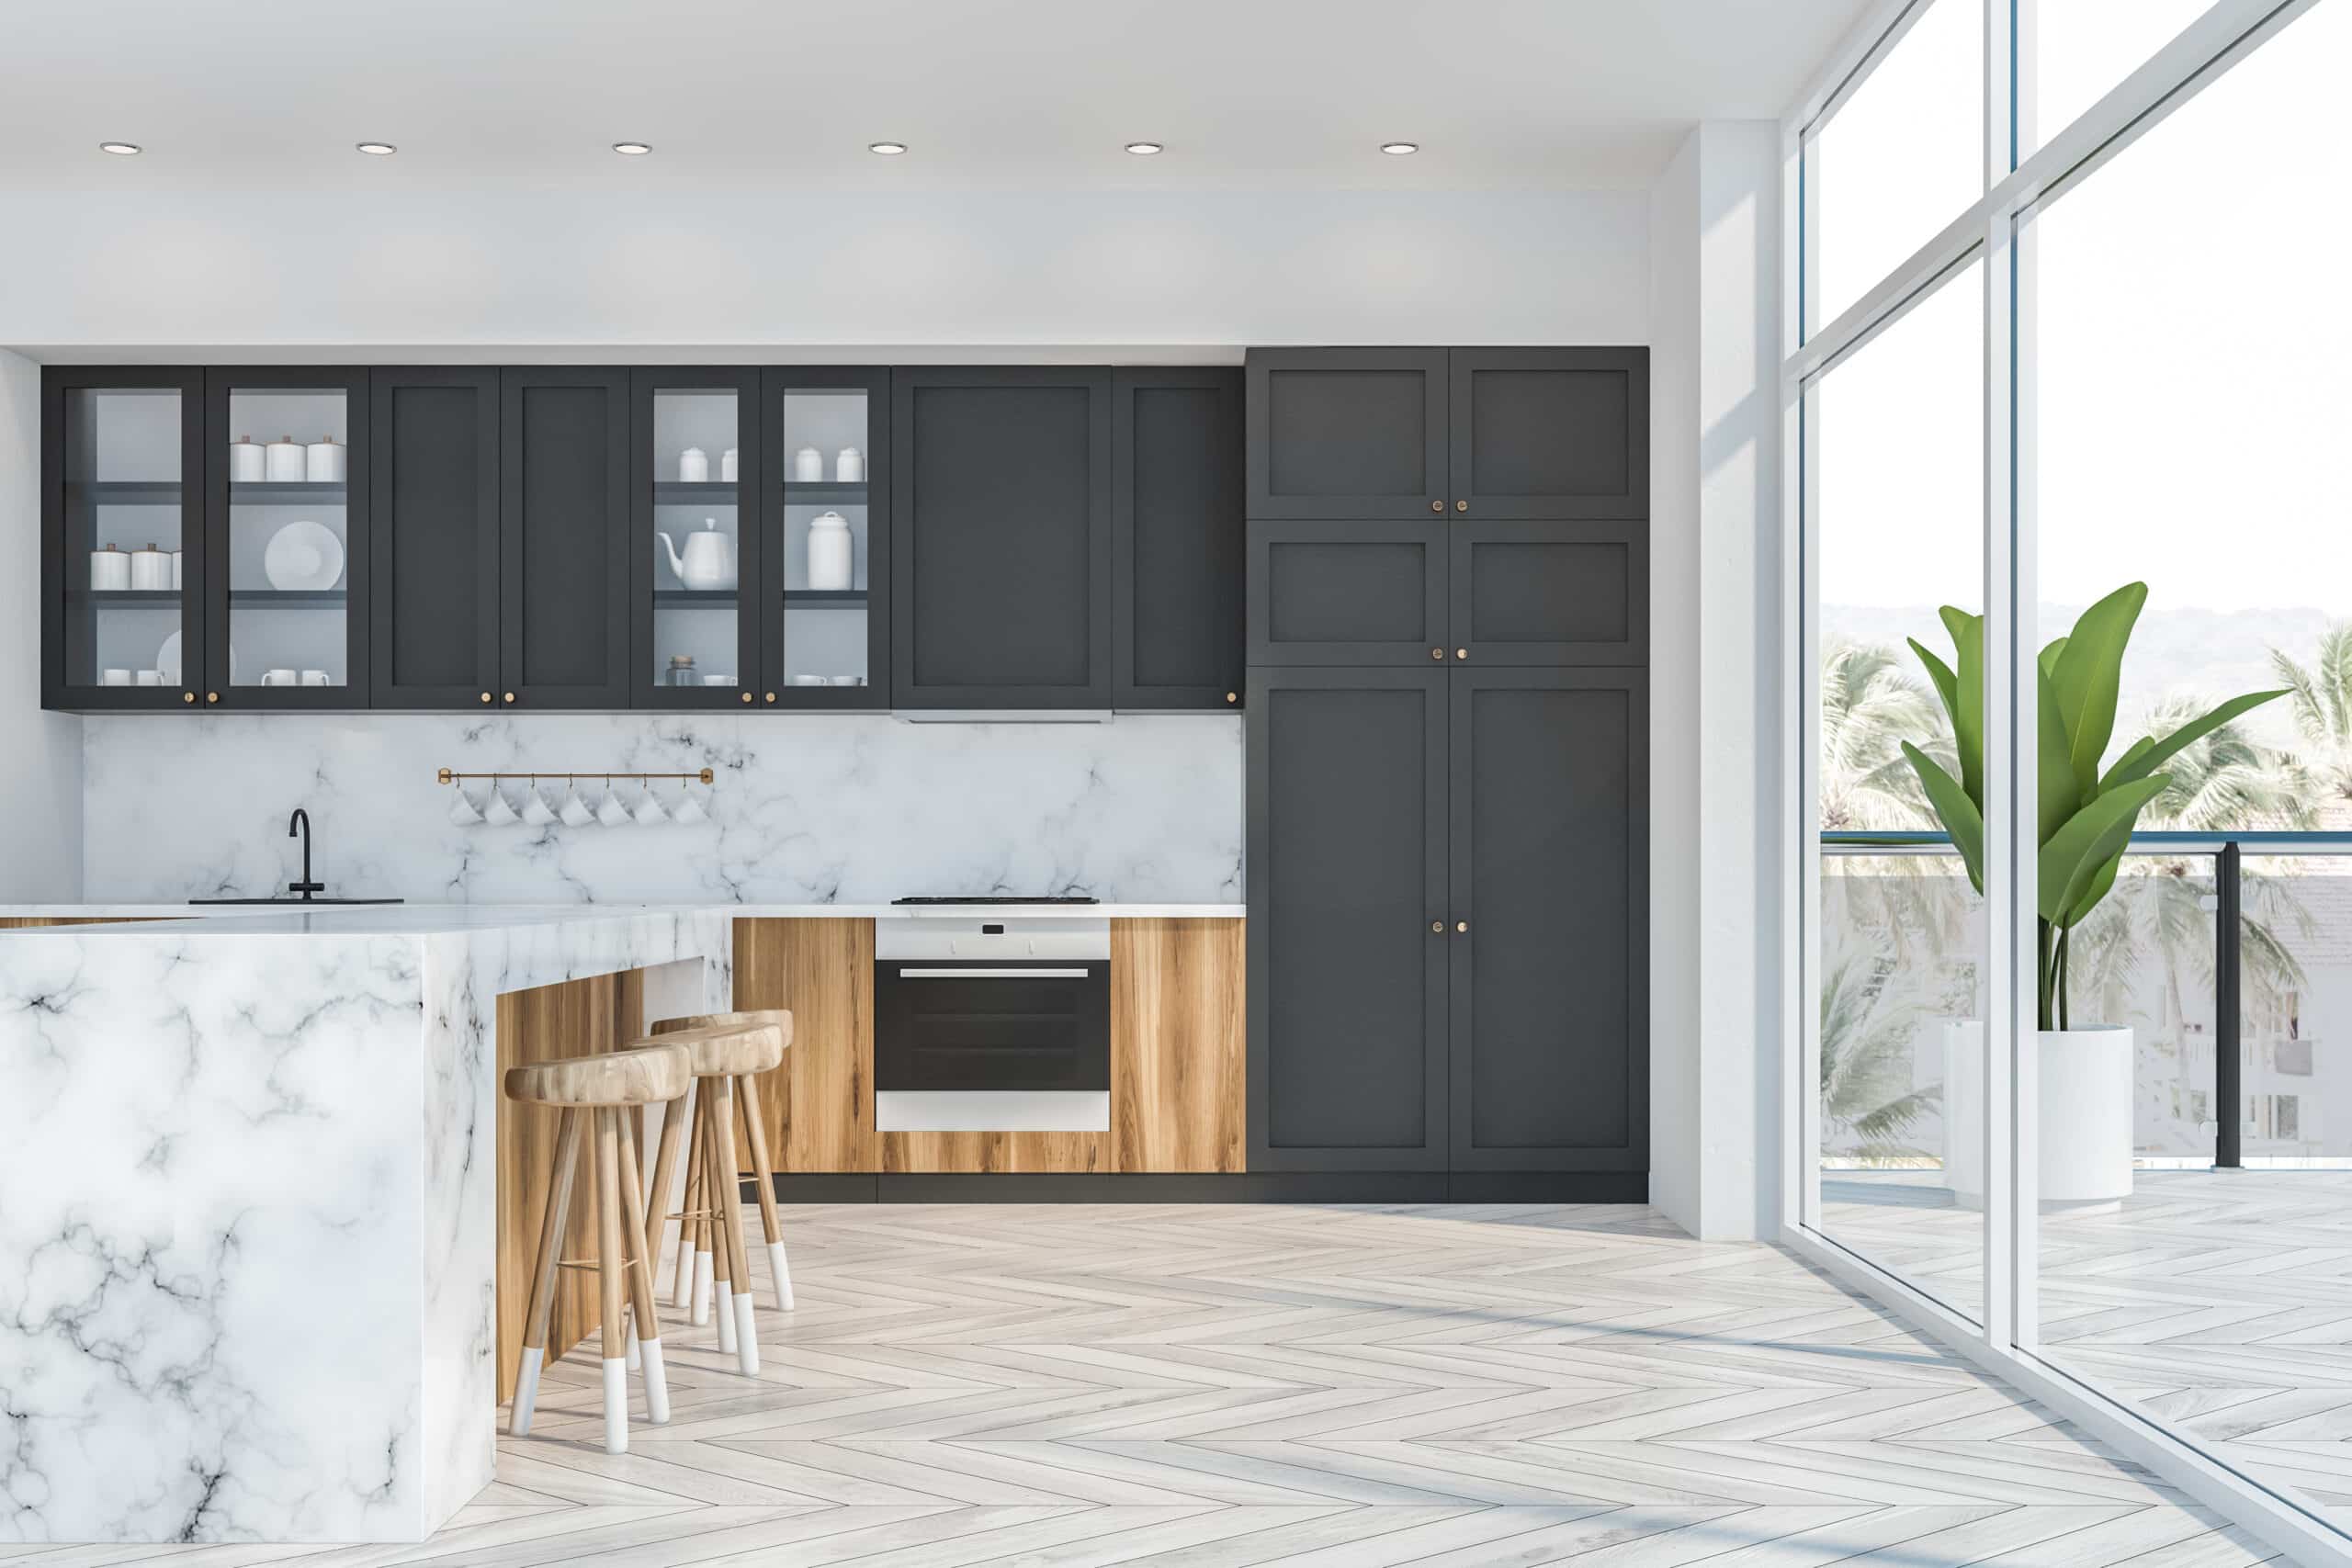 Interior of luxury kitchen with white and marble walls, wooden floor, large window with balcony, wooden countertops, gray cupboards and marble bar with stools. 3d rendering